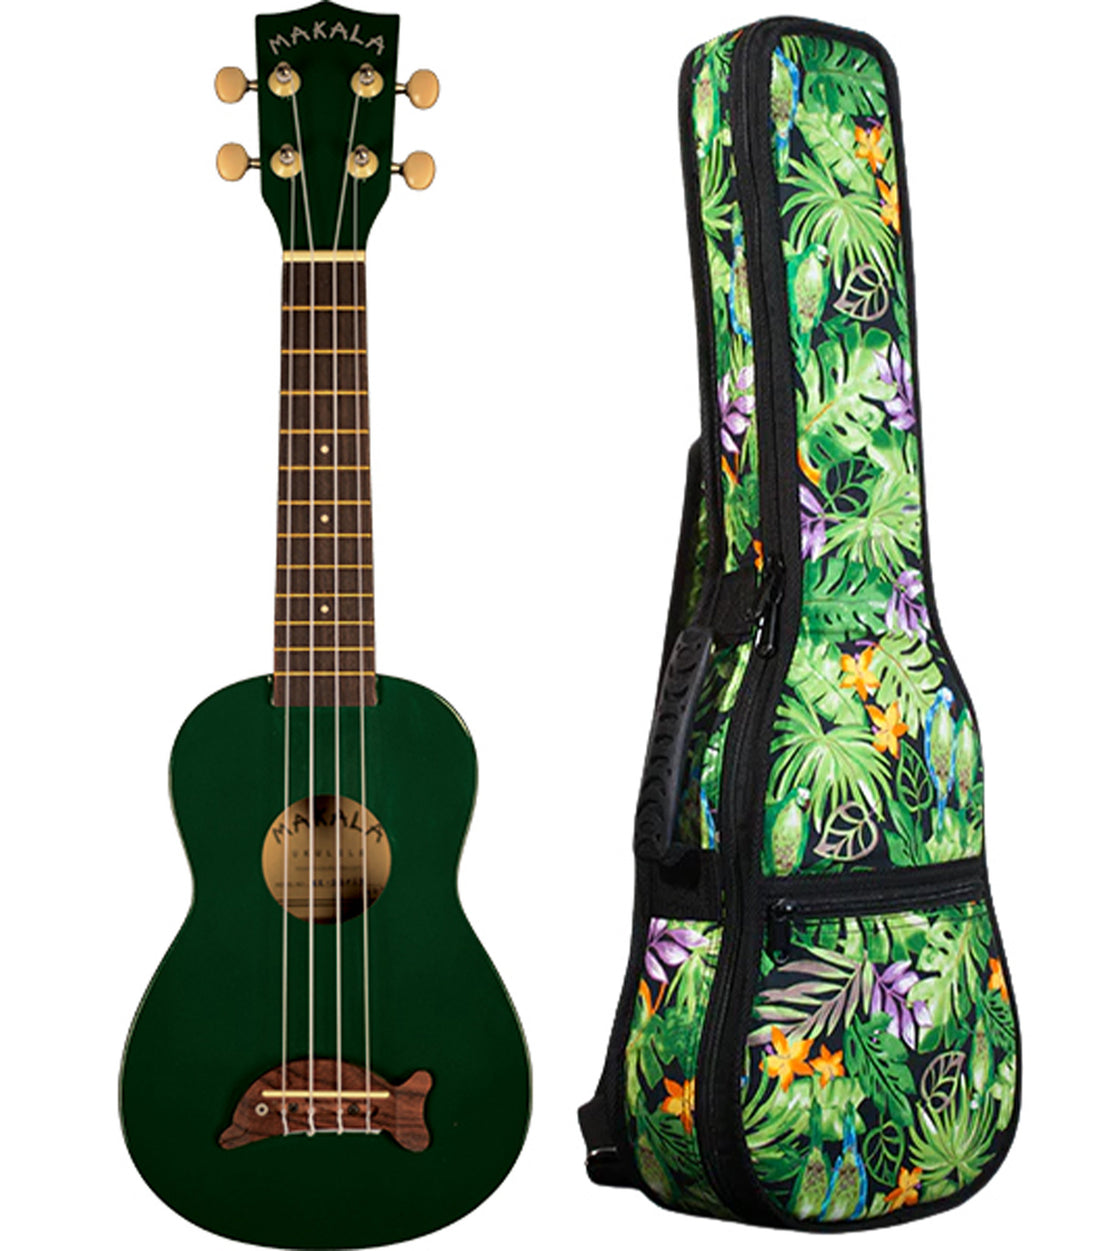 MK-SD/GN Green Soprano Dolphin Ukelele Includes Gigbag Floral Print, Padded with Backpack Straps